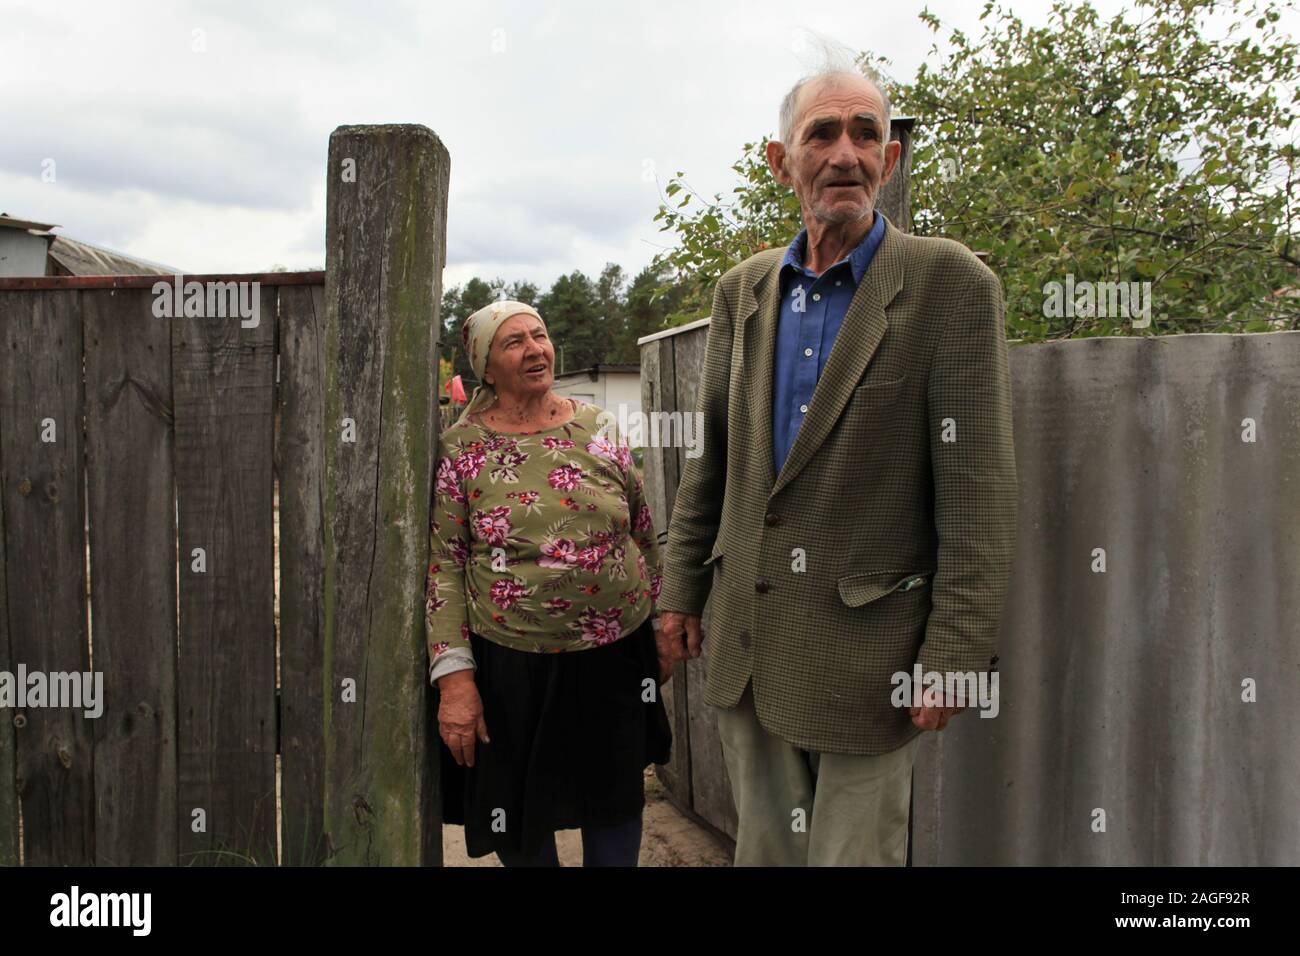 Ivan Ilchenko with his wife Maria in front of their farm in the village Kupovate, located in the Chernobyl Exclusion Zone. Both are illegal residents (Samosely), who returned some months after the evacuation of the Chernobyl Exclusion Zone (following the Chernobyl disaster in April 1986) at their farm. Kupovate, Chernobyl Exclusion Zone, Ivankiv Raion, Kiev Oblast, Ukraine, Eastern Europe Stock Photo